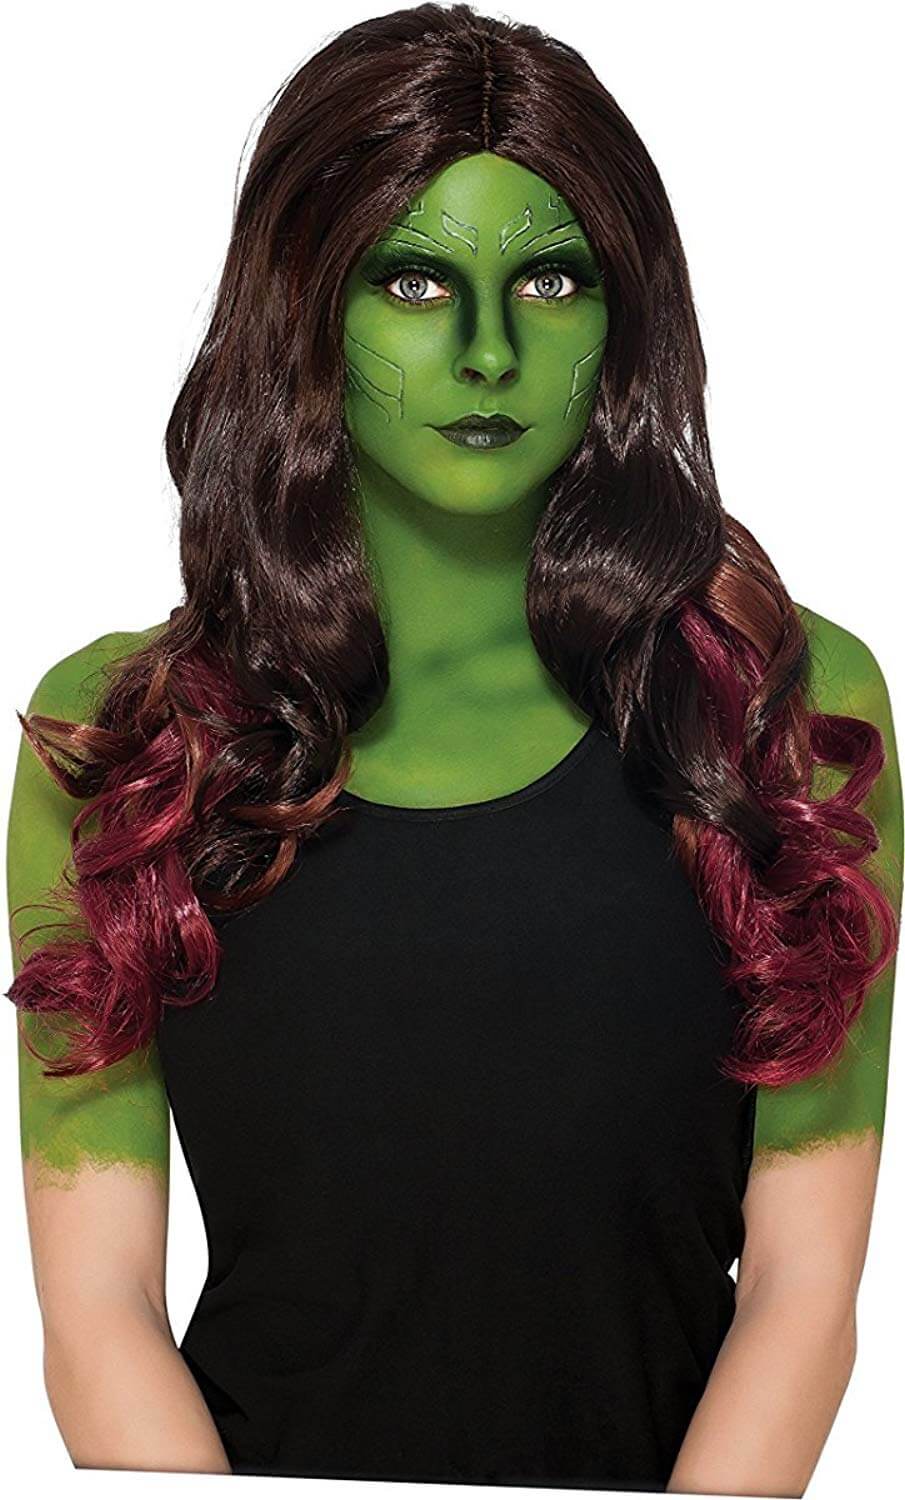 49 Hot Pictures Of Gamora Are Heaven On Earth | Best Of Comic Books